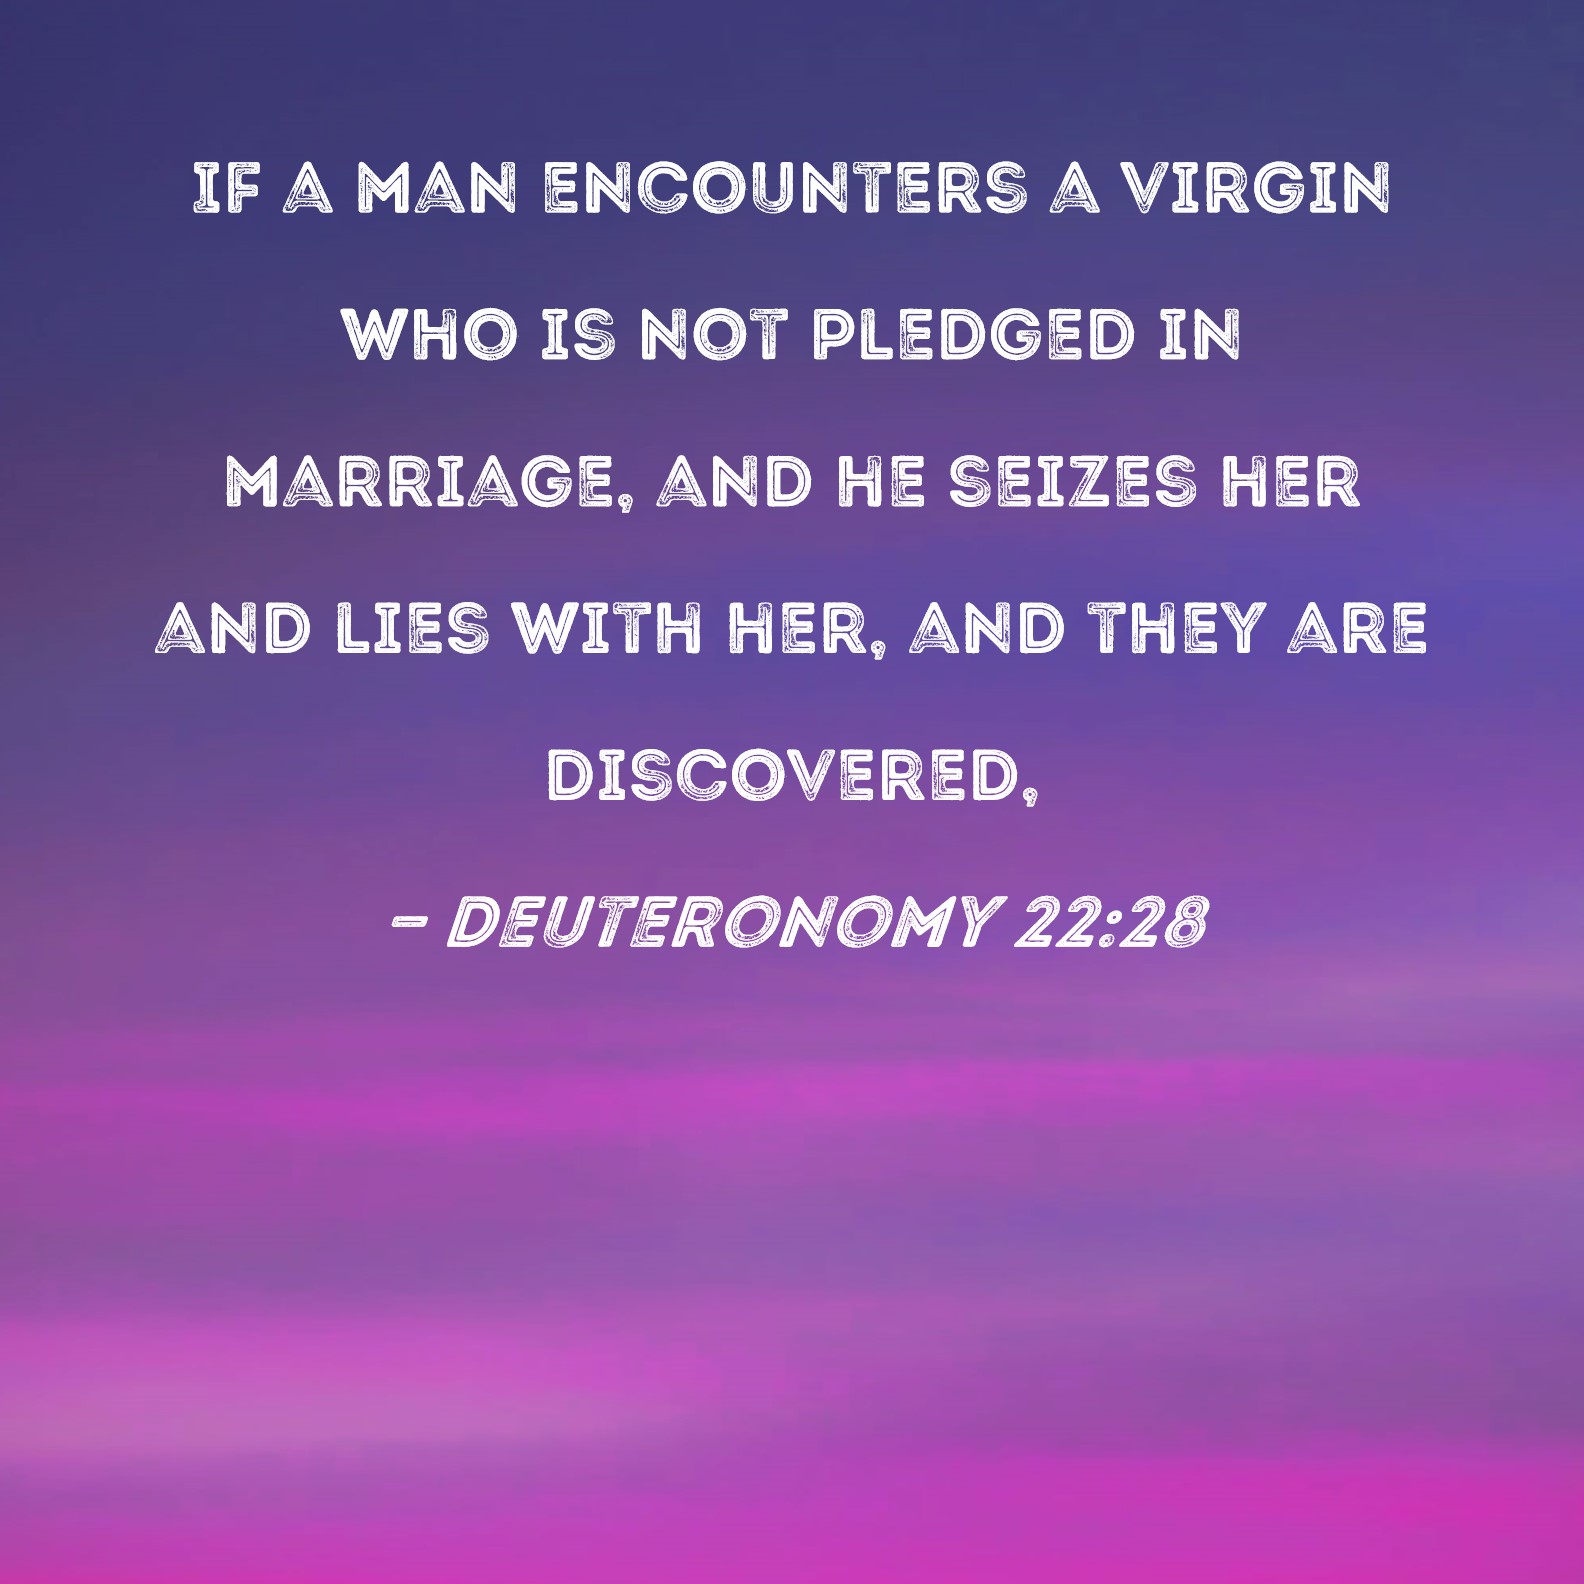 Deuteronomy 2228 If a man encounters a virgin who is not pledged in marriage, and he seizes her and lies with her, and they are discovered, pic